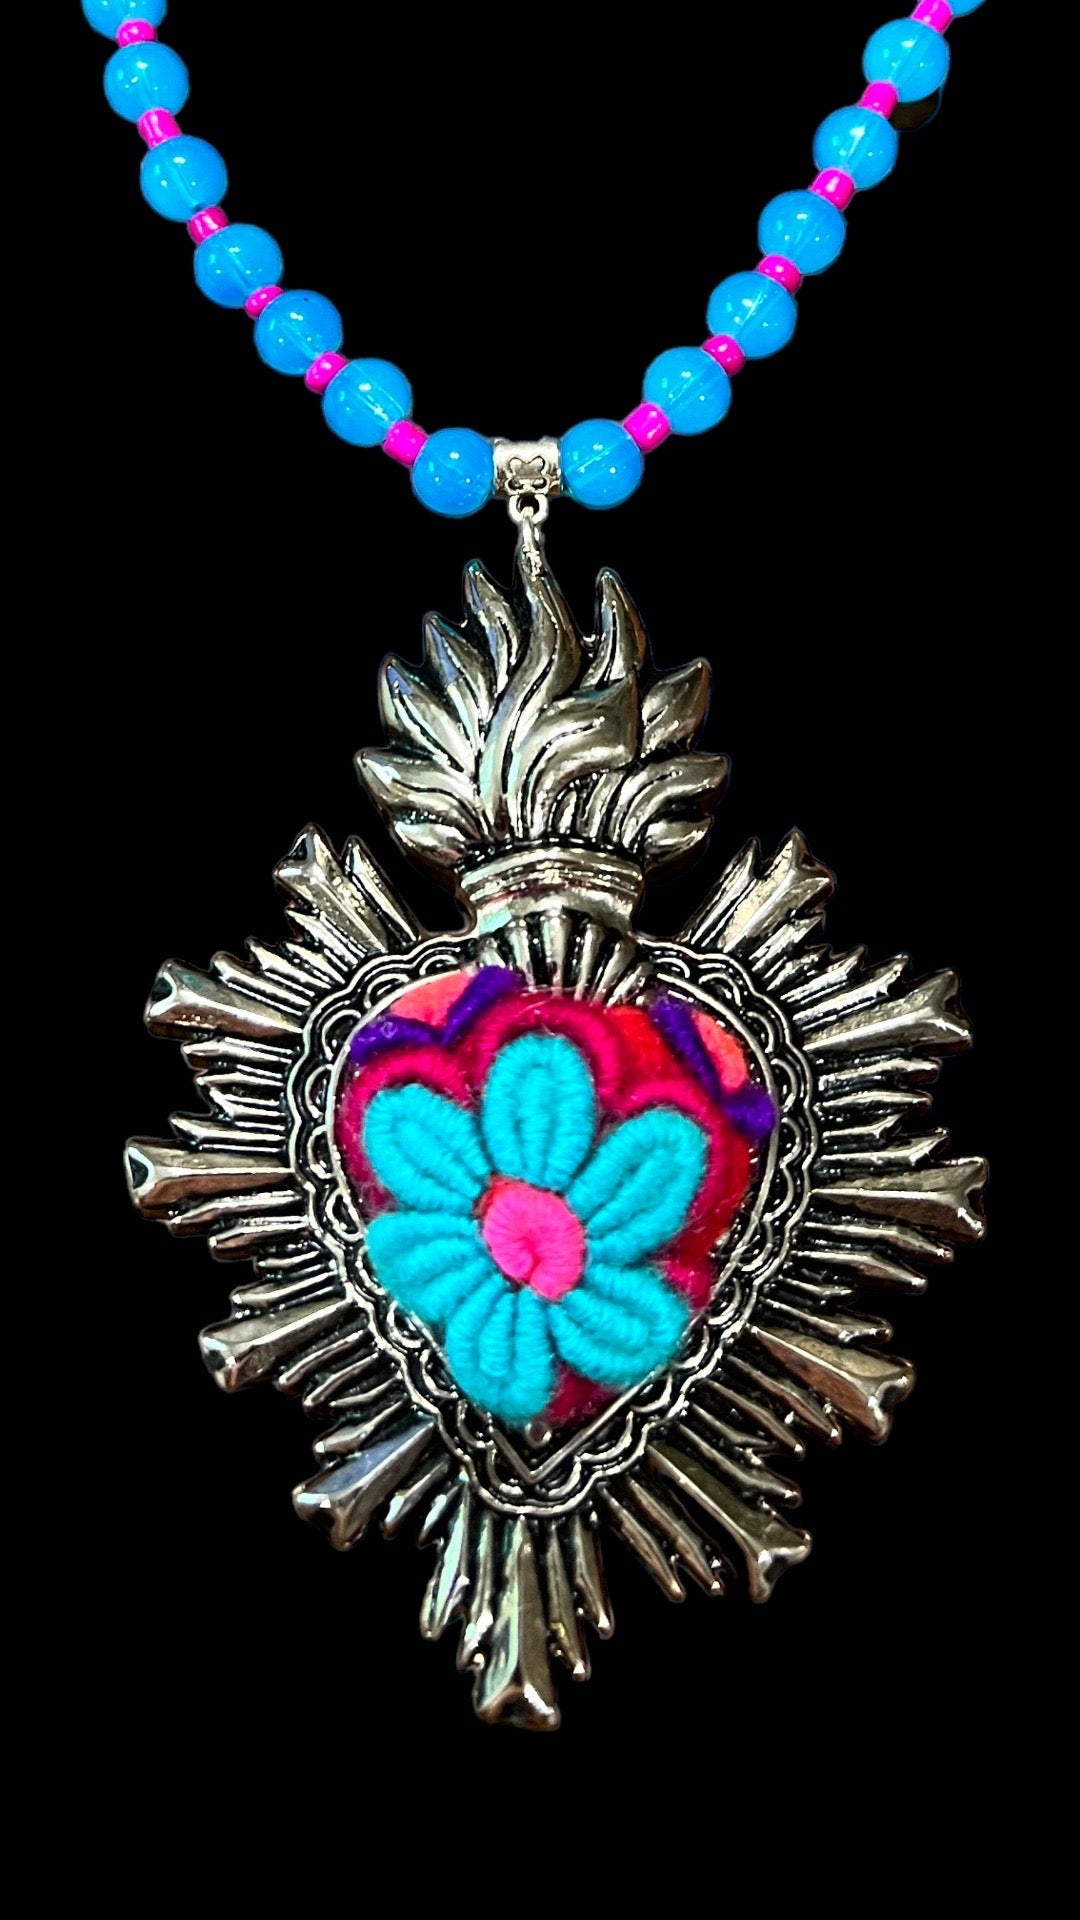 Cultural fashion necklace of red, blue, pink and purple hearts. In the center it has a handmade blue flower and around it has silver ornaments, and the chain is made with blue and pink stones.